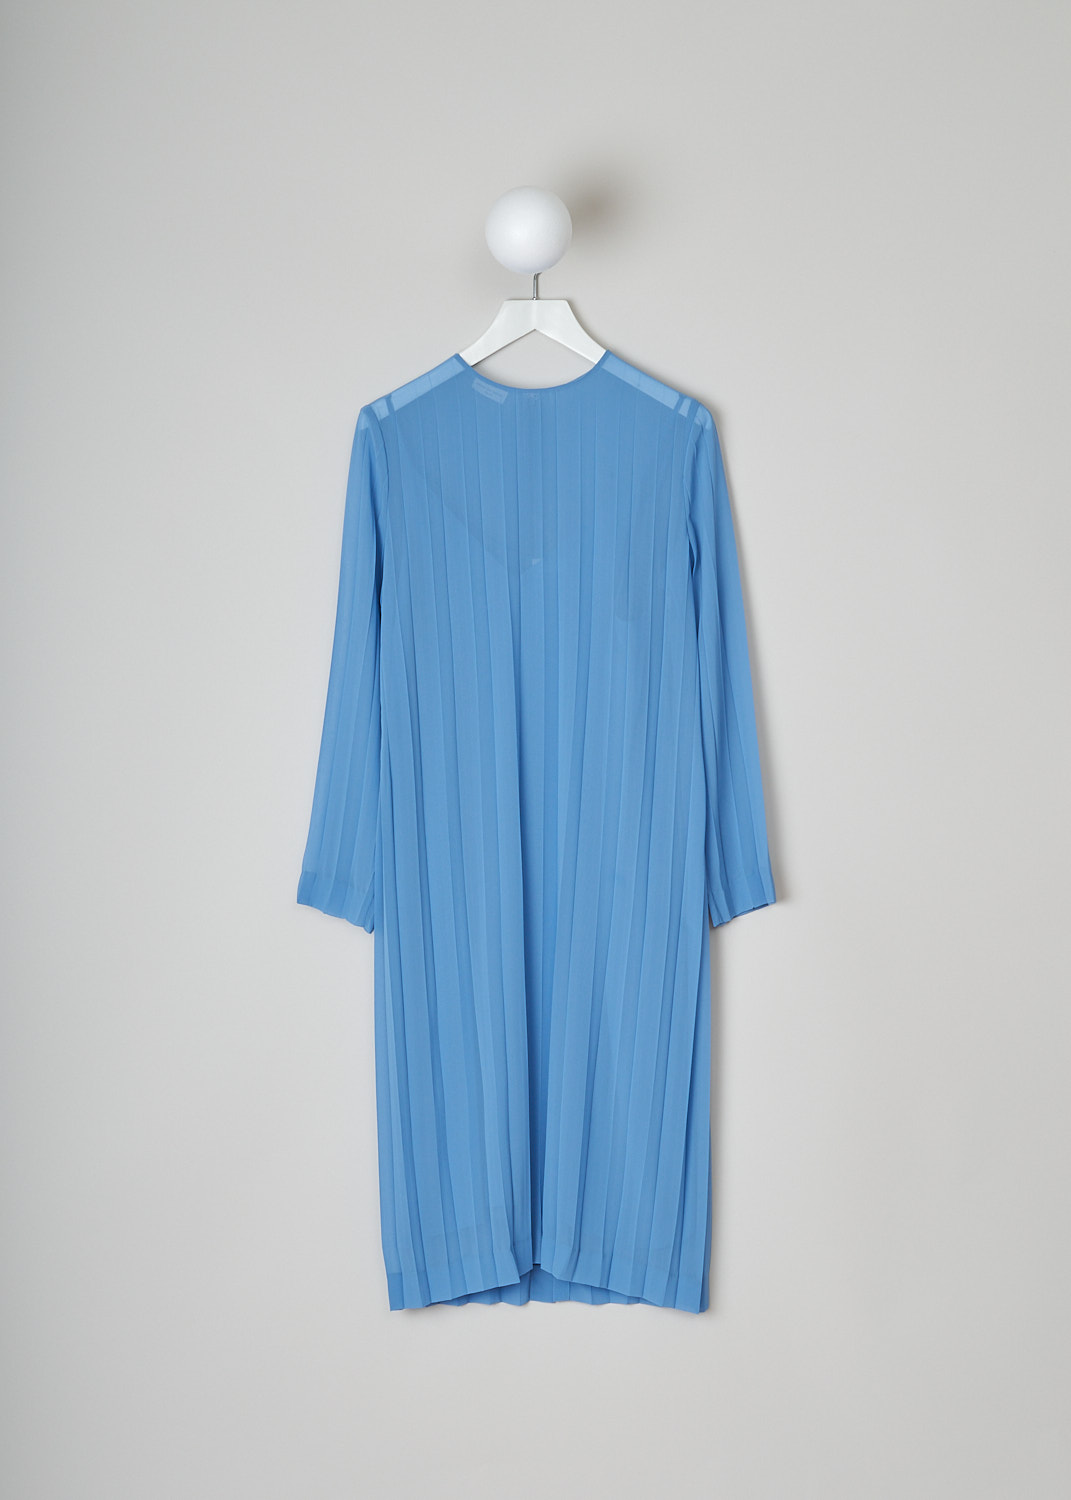 DRIES VAN NOTEN, SKY BLUE PLEATED DELAVITA DRESS, DELAVITA_6265_WW_DRESS_SKY, Blue, Front, This sky blue semi sheer Delavita dress is fully pleated. The dress has a high round neckline an three-quarter sleeves. The straight hemline reaches to below the knee. In the back, a hook-and-eye and concealed zip in the centre function as the closure option. The dress comes with a separate slip dress in the same fabric and color.   
